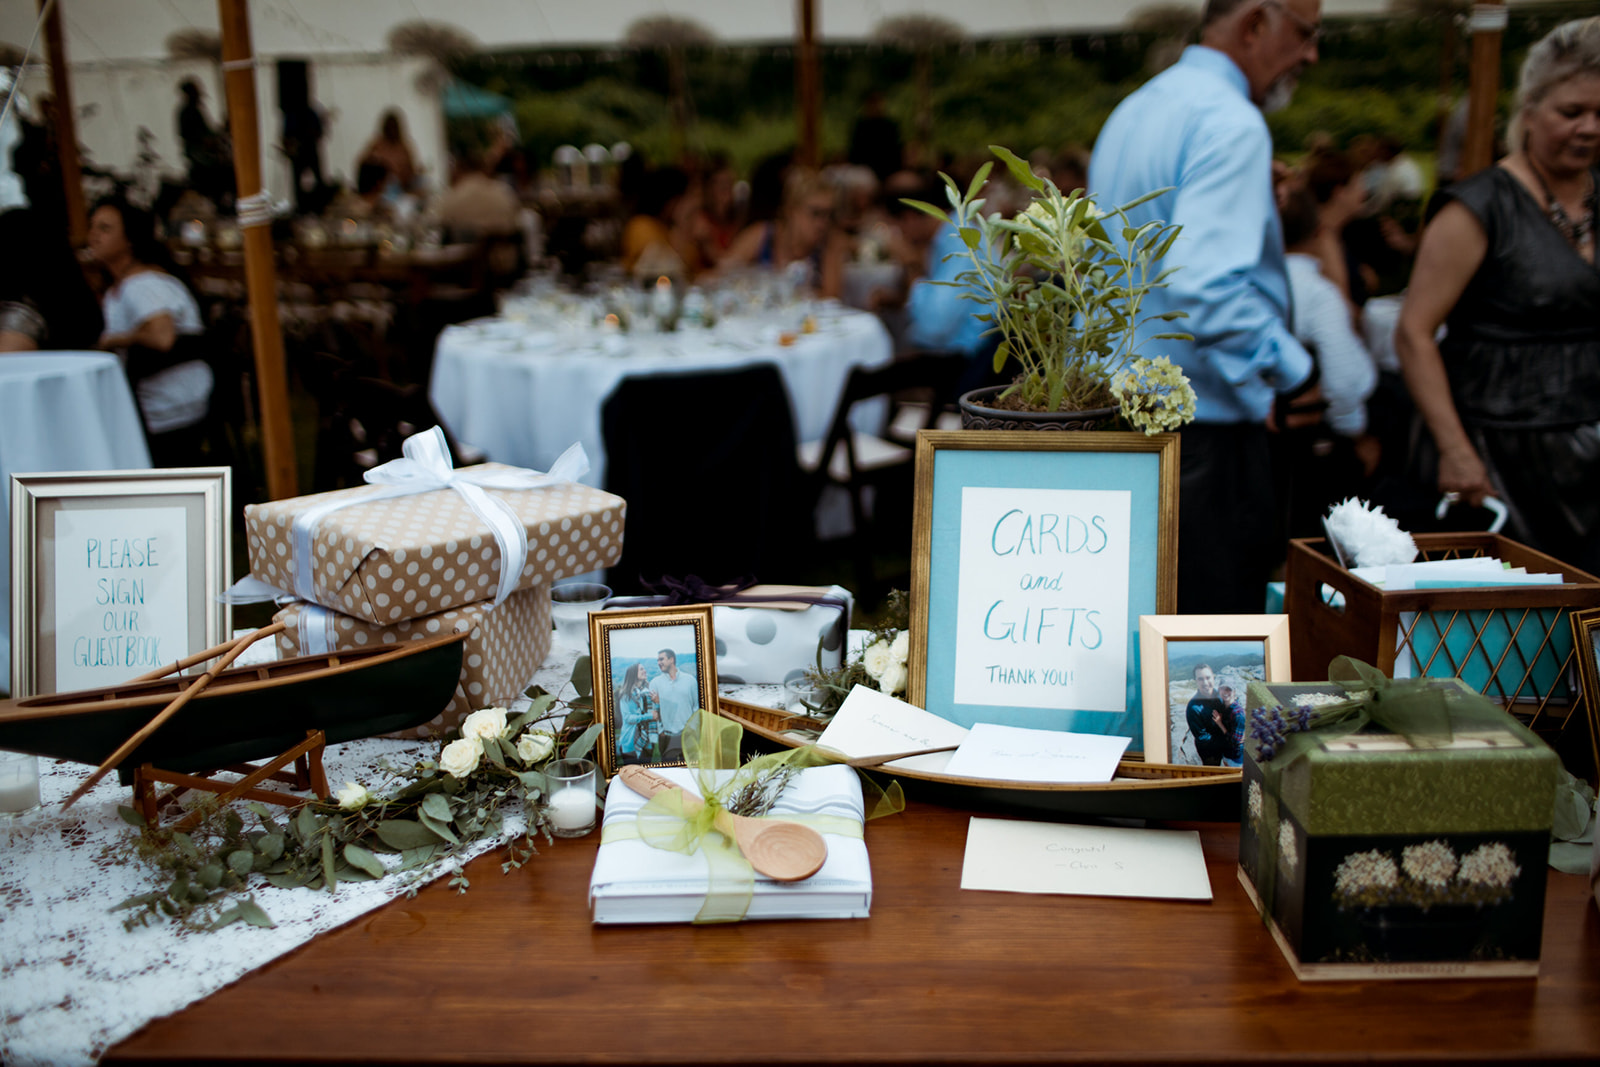 Outdoor tented wedding by the water, boat themed gift and cards table - Pearl Weddings & Events